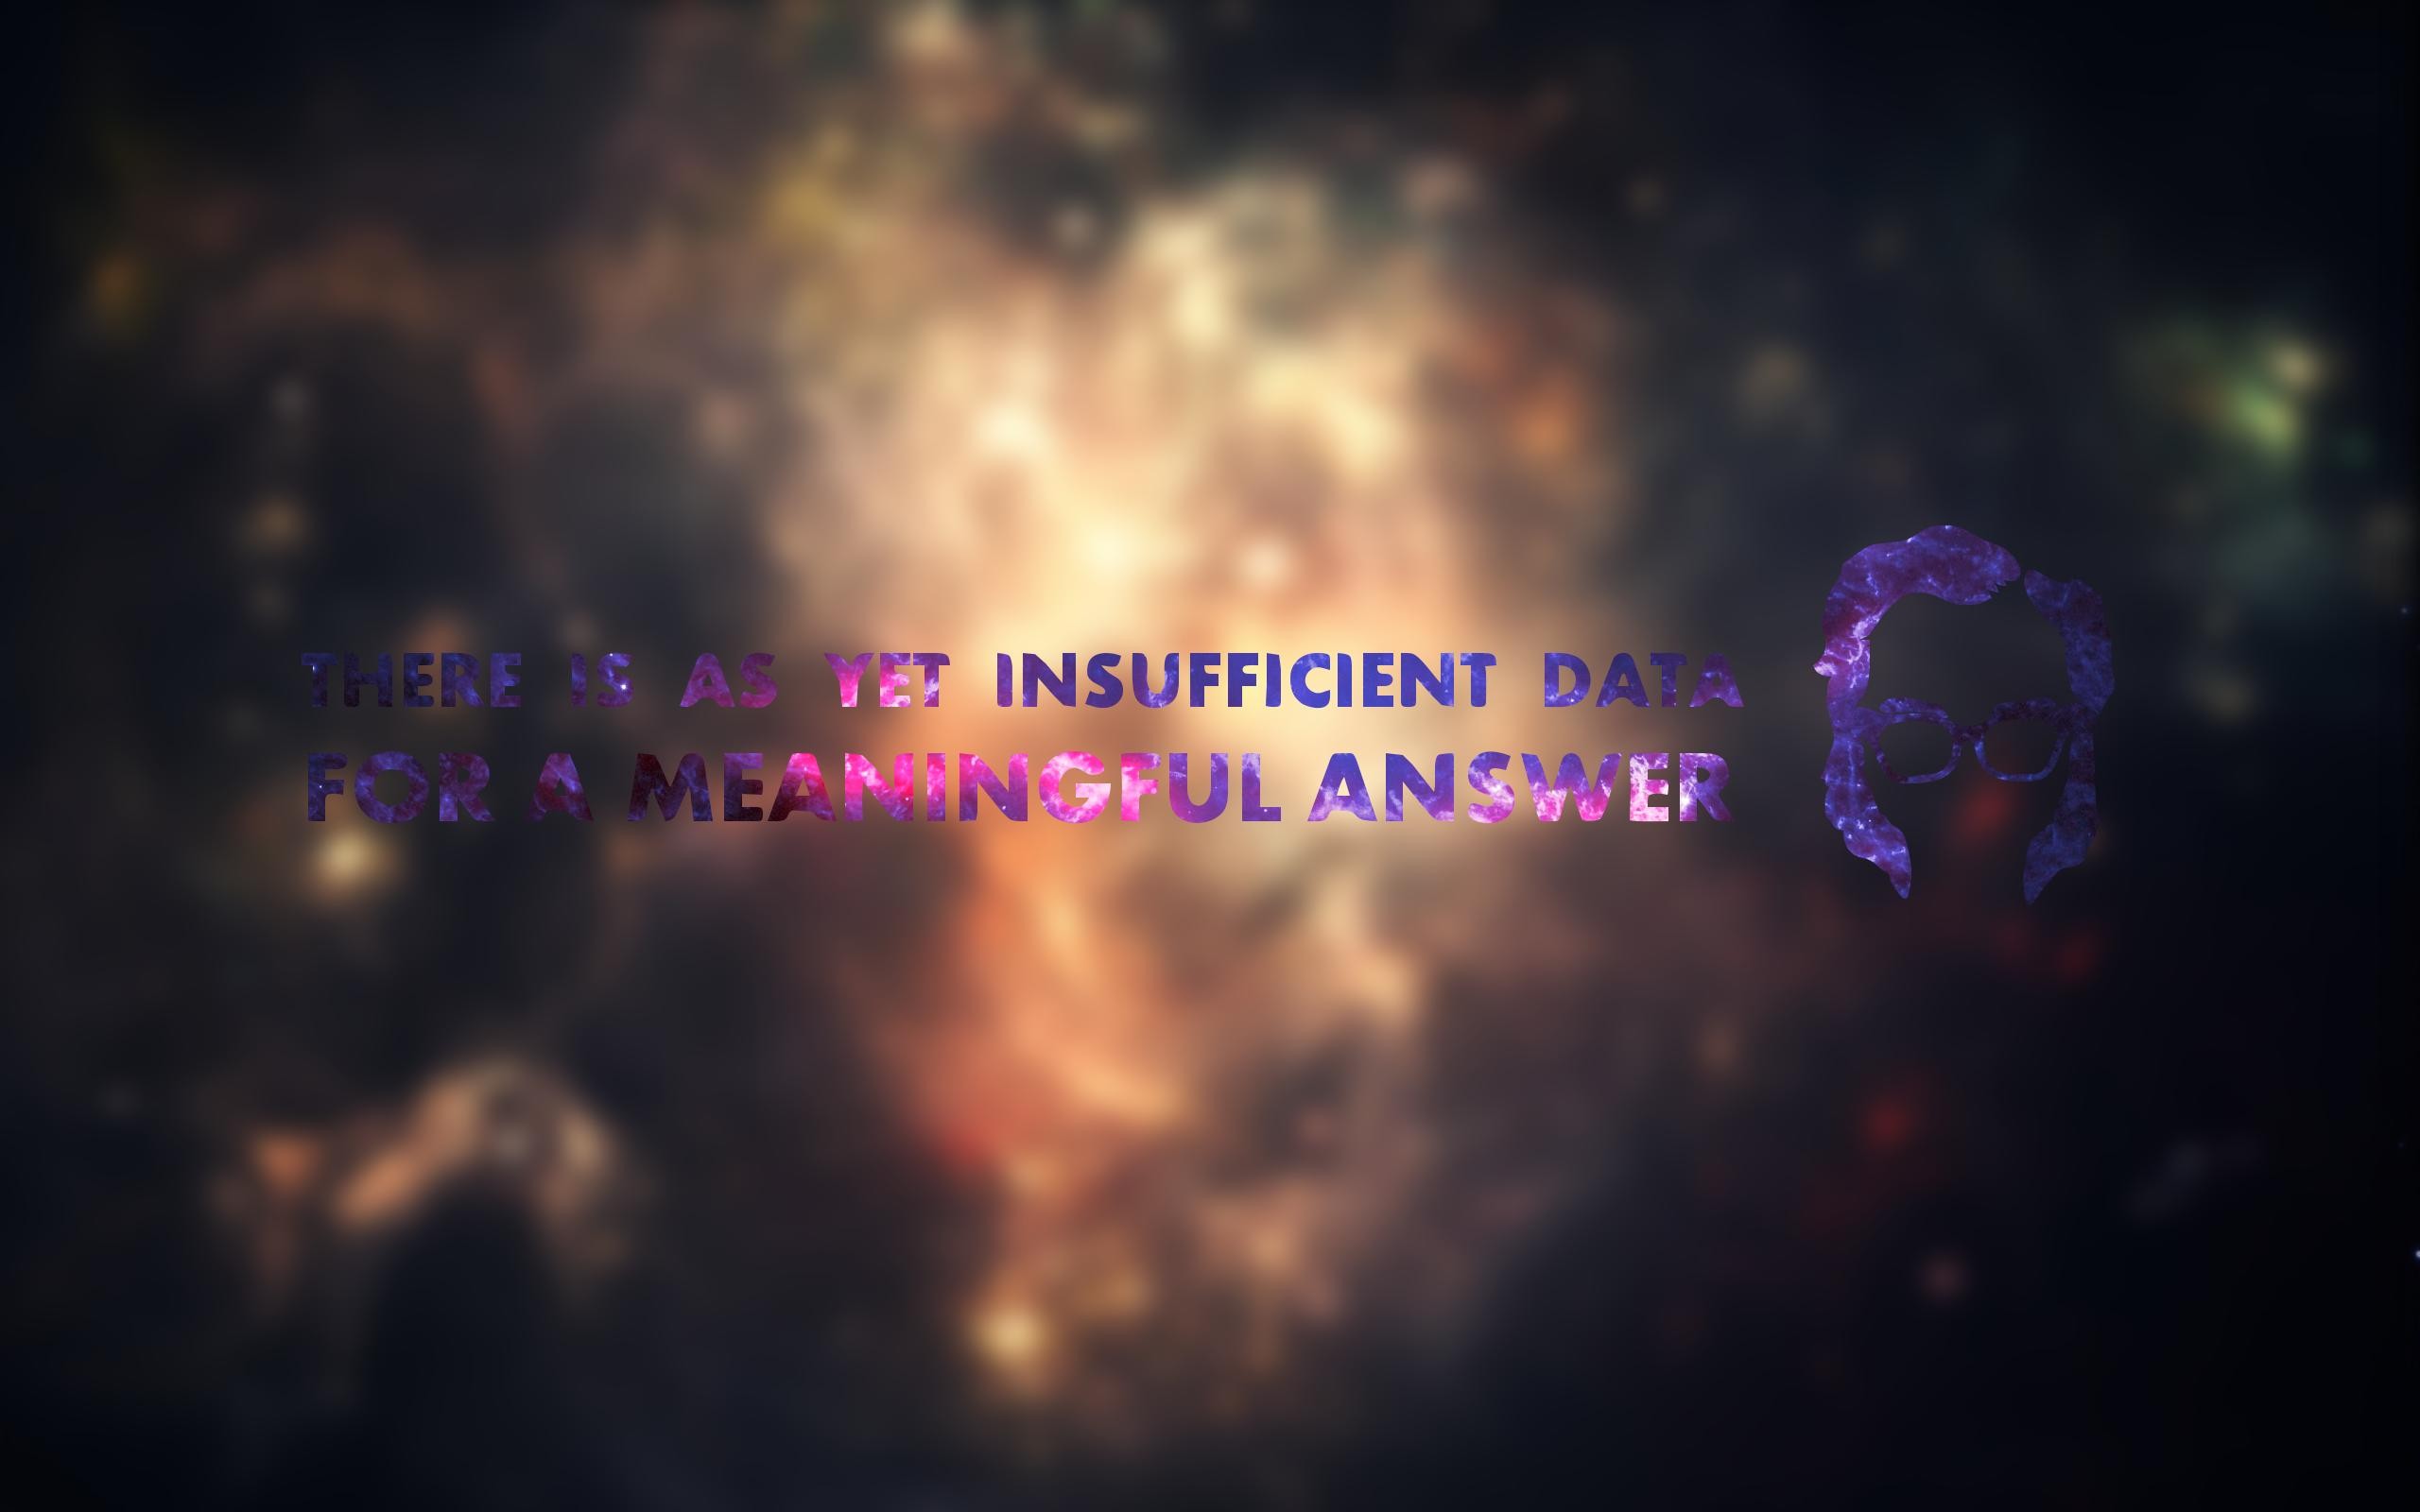 Isaac Asimov Space Blurred Typography 2560x1600